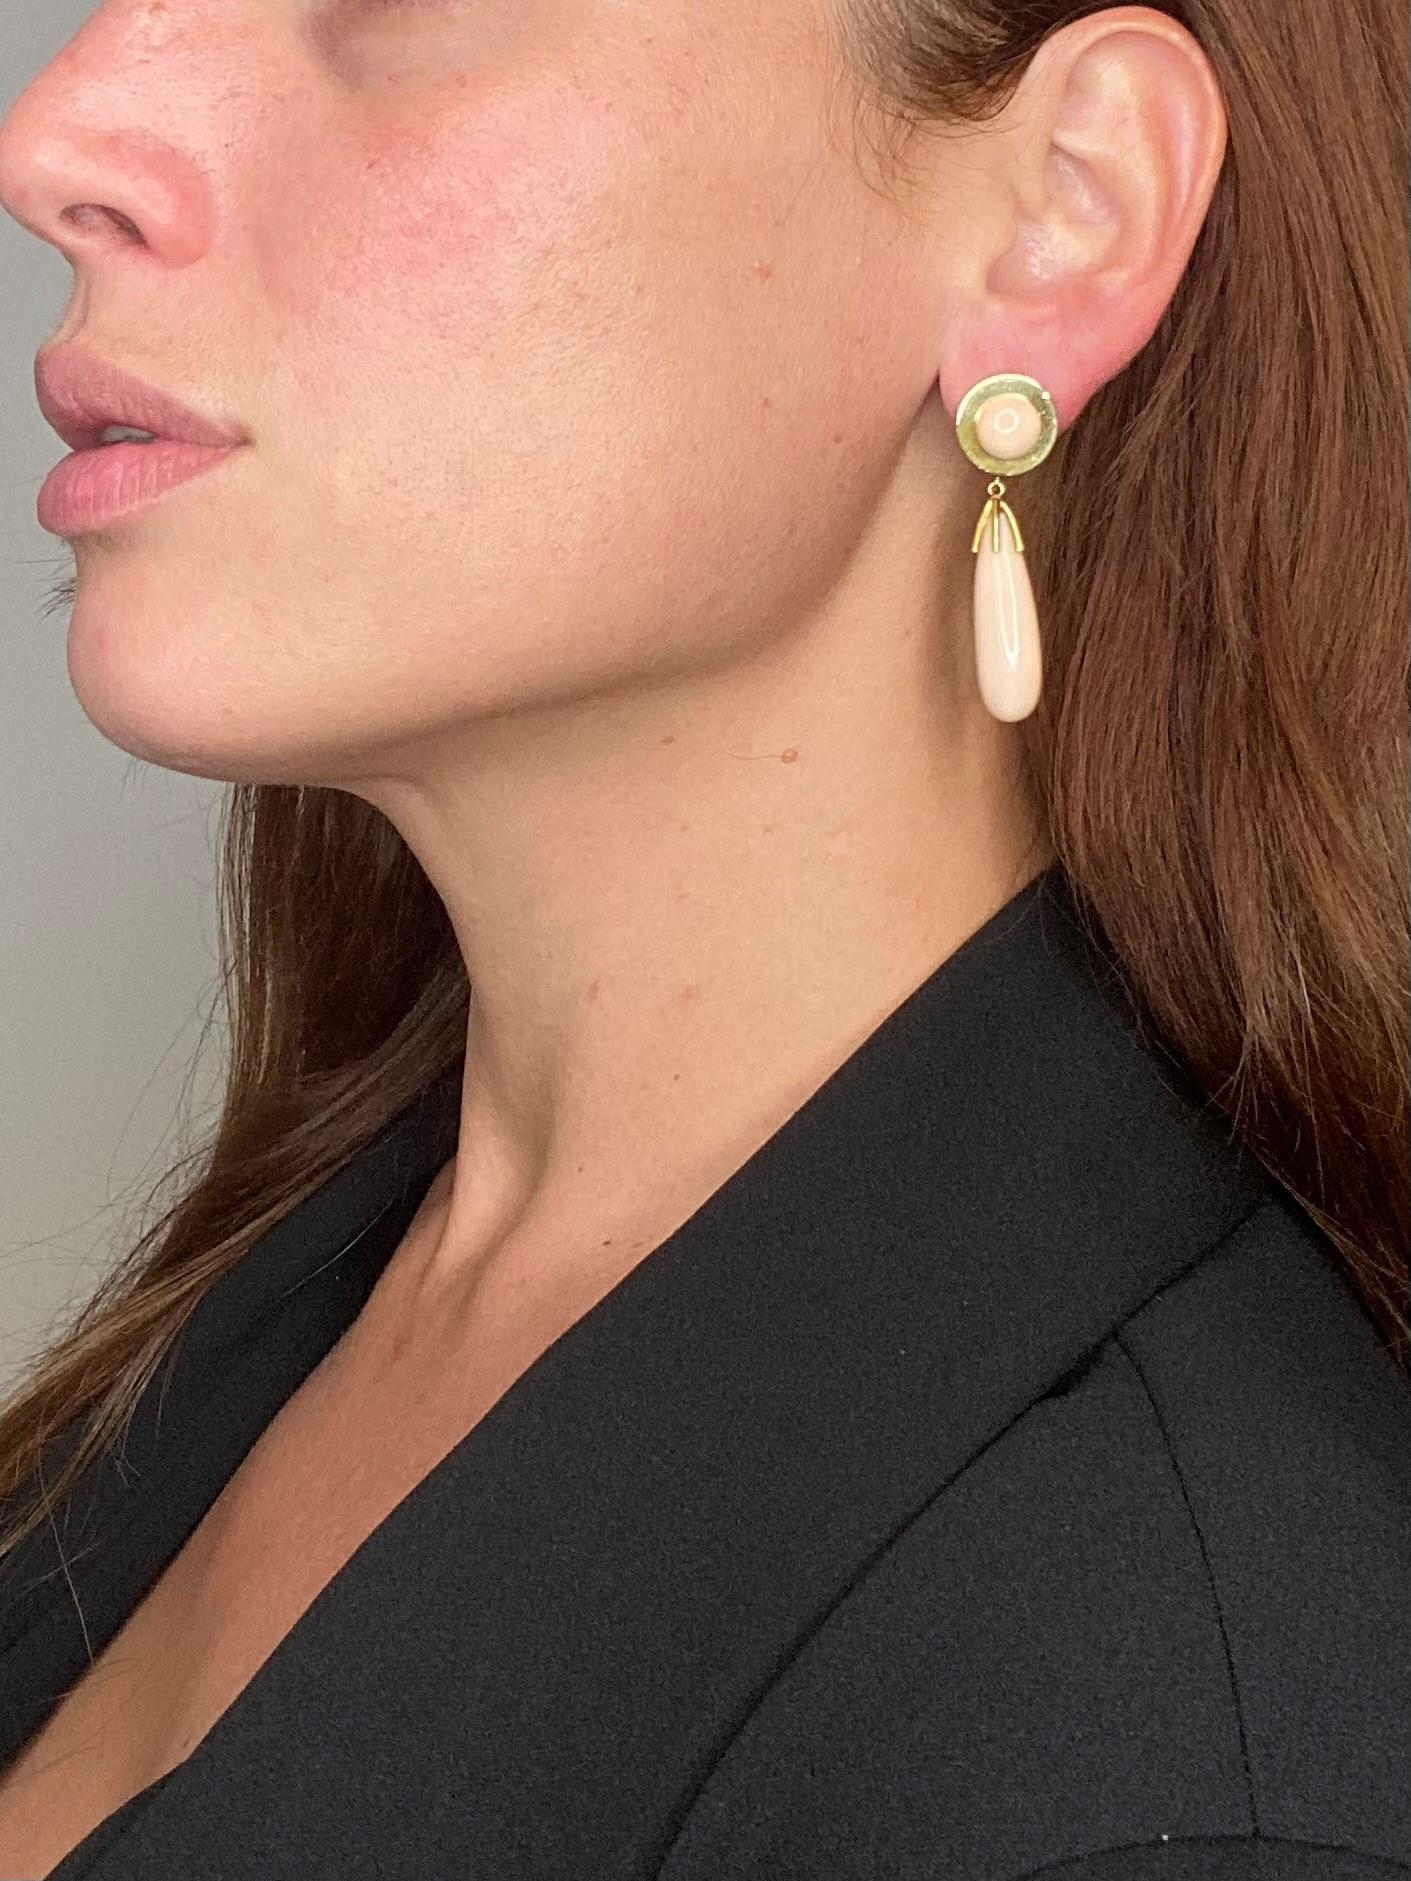 Classic pair of long earrings designed by Cellino.

Designed and made in Italy during the mid century period, circa 1960's. This pair of drop earrings was crafted in solid 18 kt yellow gold and suited with posts (removable) for pierced ears and